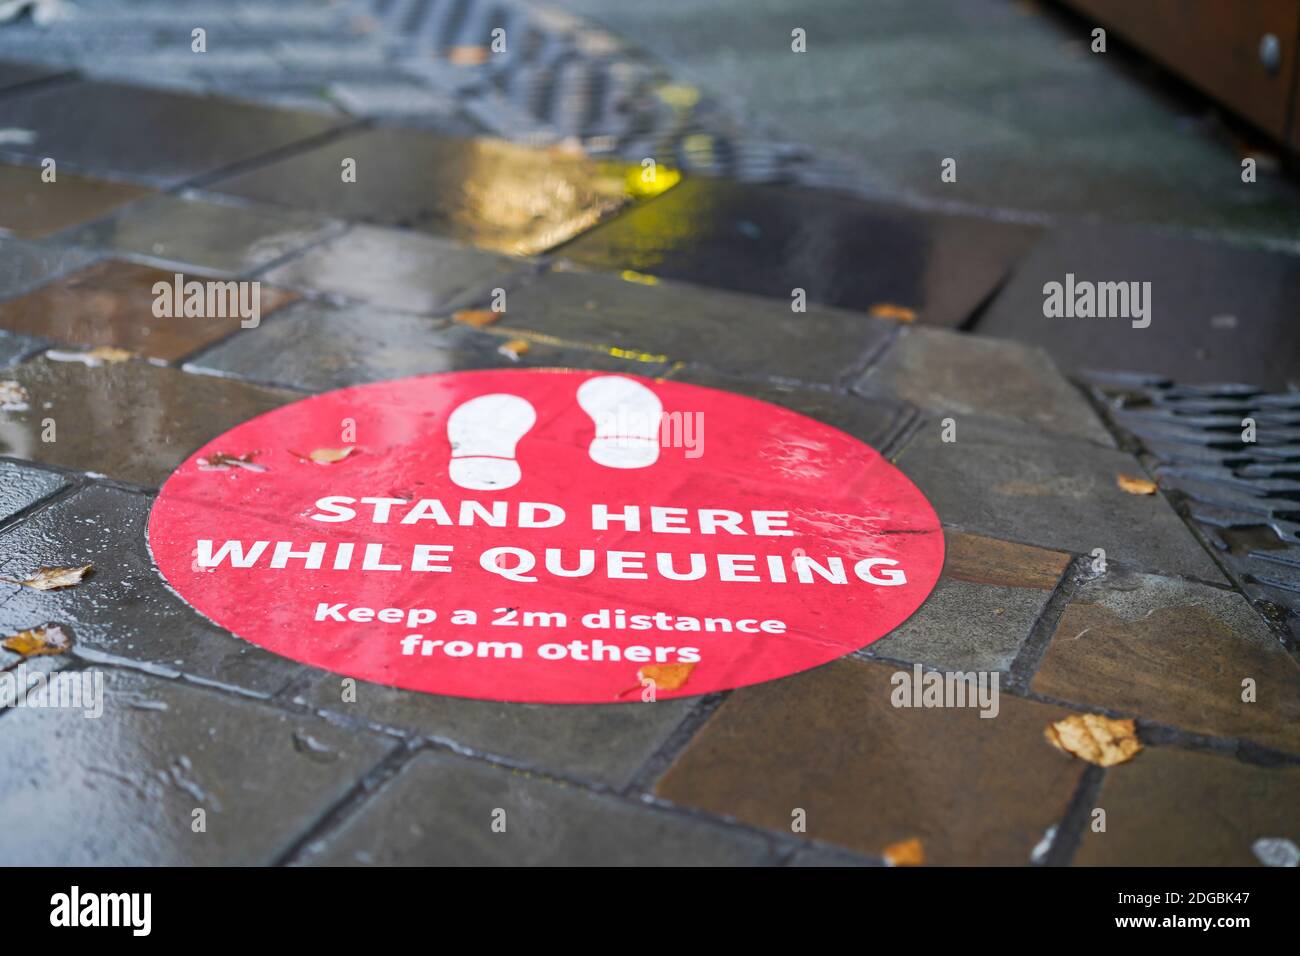 Social distance floor sign marker in UK town centre. Public advice to keep 2m distance from others when queueing during coronavirus pandemic. Stock Photo